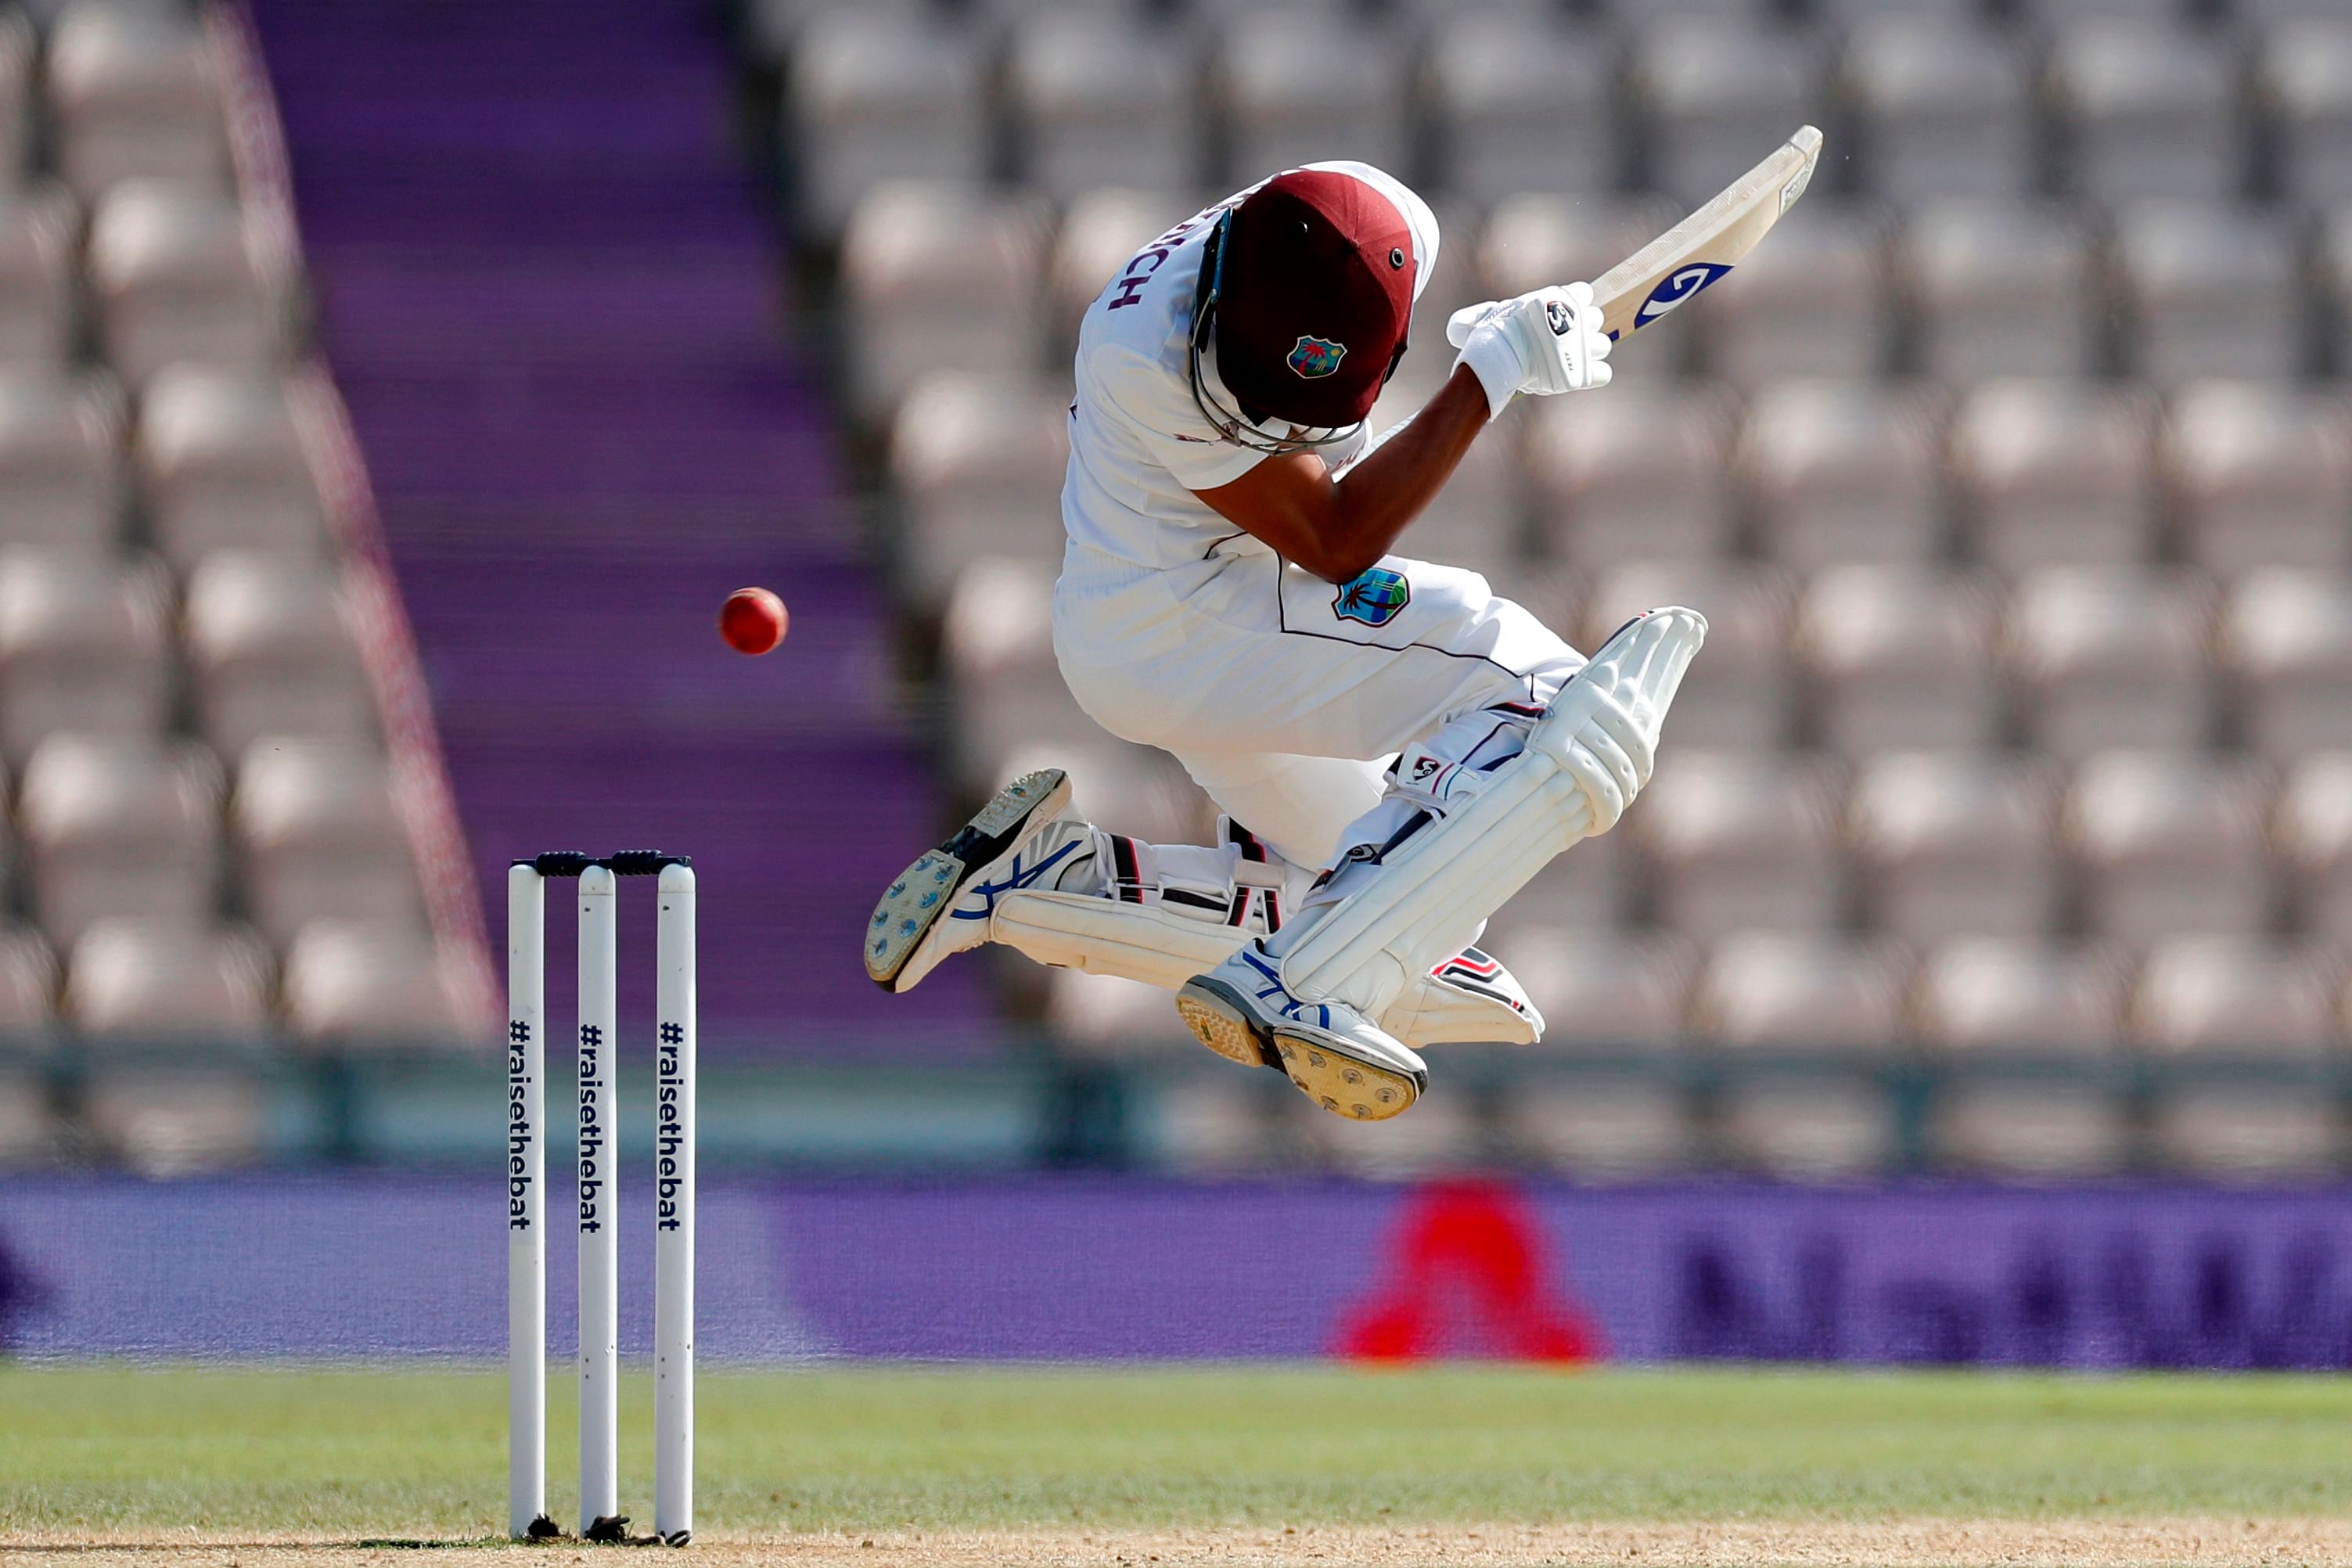 West Indies' Shane Dowrich evades a short ball on the fifth day of the first Test cricket match between England and the West Indies at the Ageas Bowl in Southampton, southwest England on July 12, 2020. Credit: AFP Photo